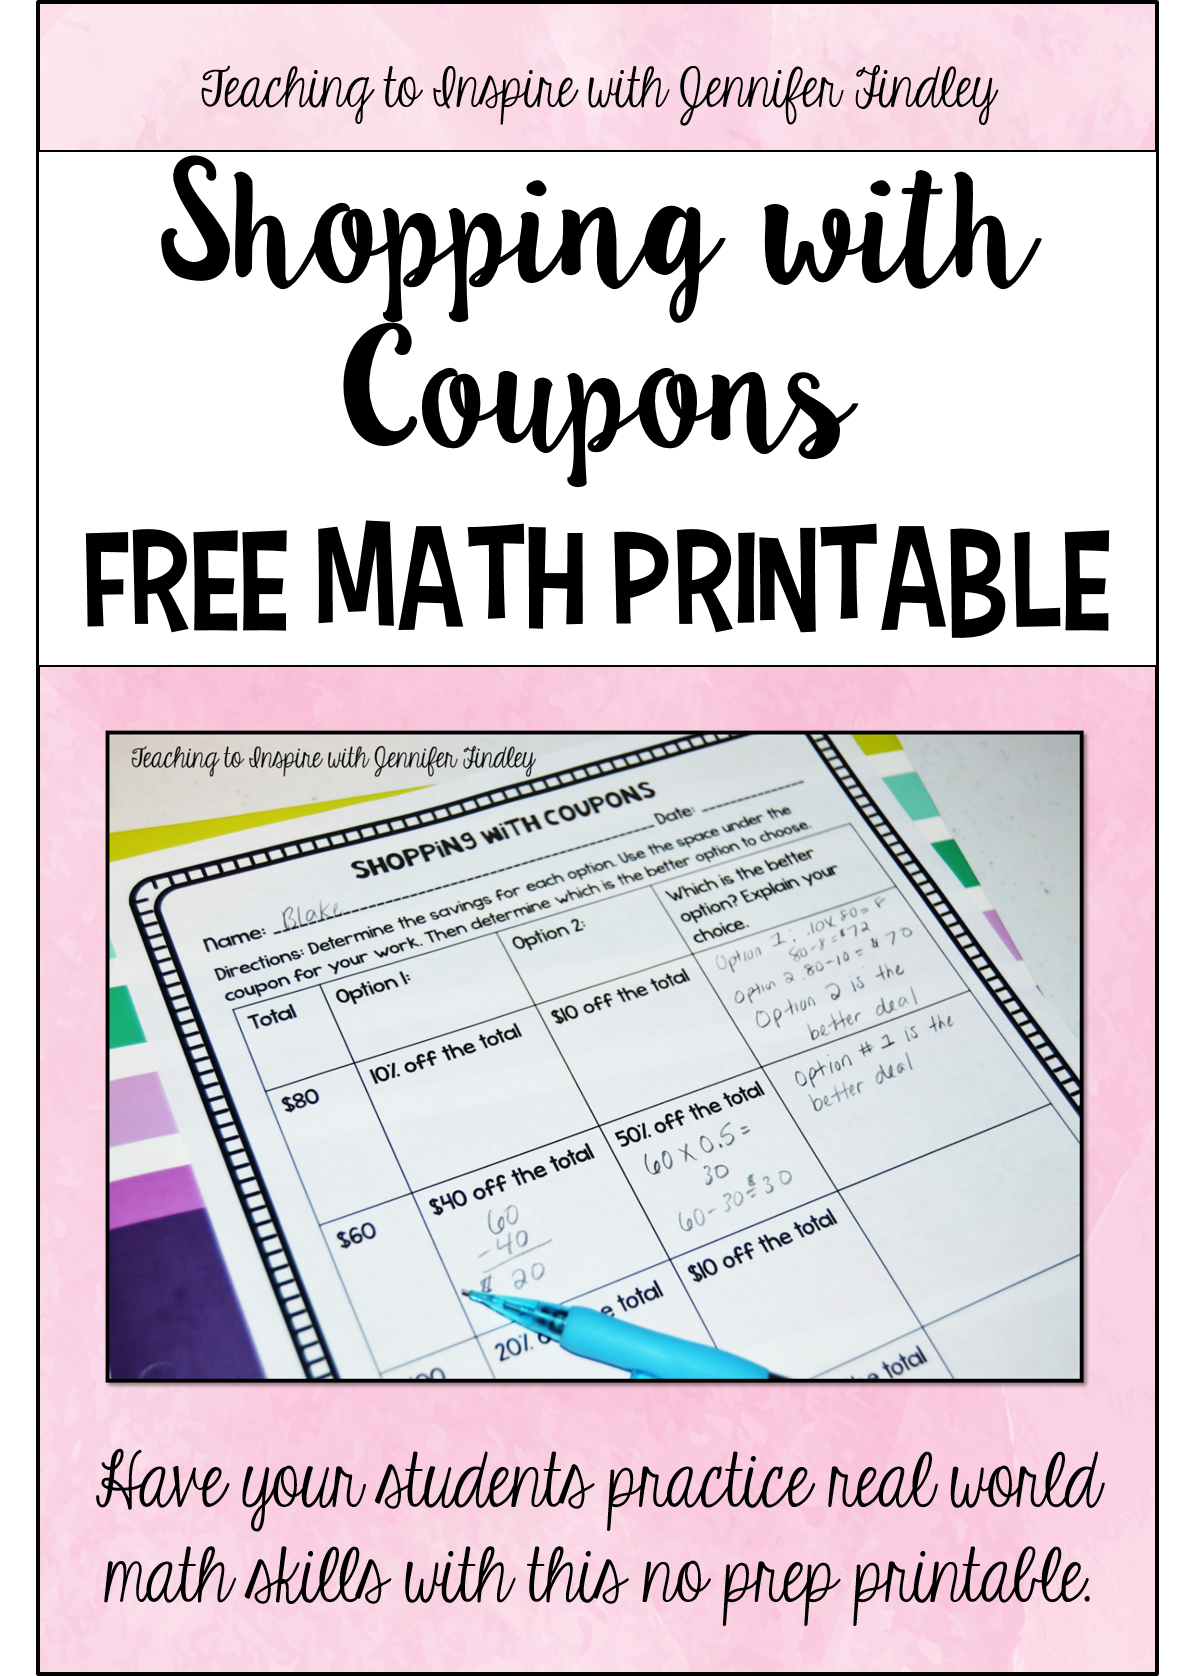 Shopping with Coupons